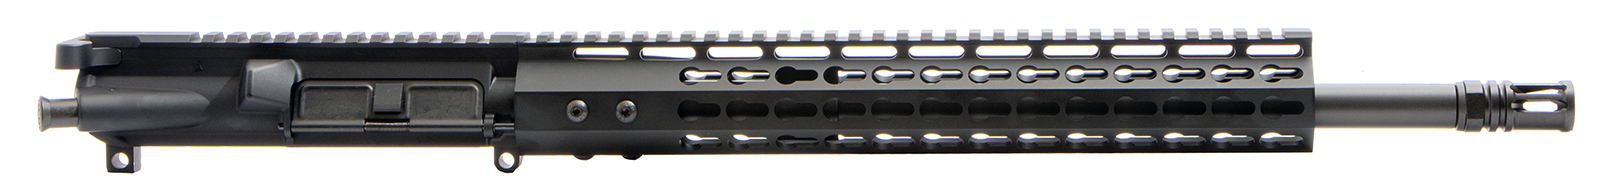 complete-ar-15-upper-assembly-16-300-aac-blackout-bcg-chh-included-13-cbc-keymod-gen-2-ar-15-handguard-rail-2